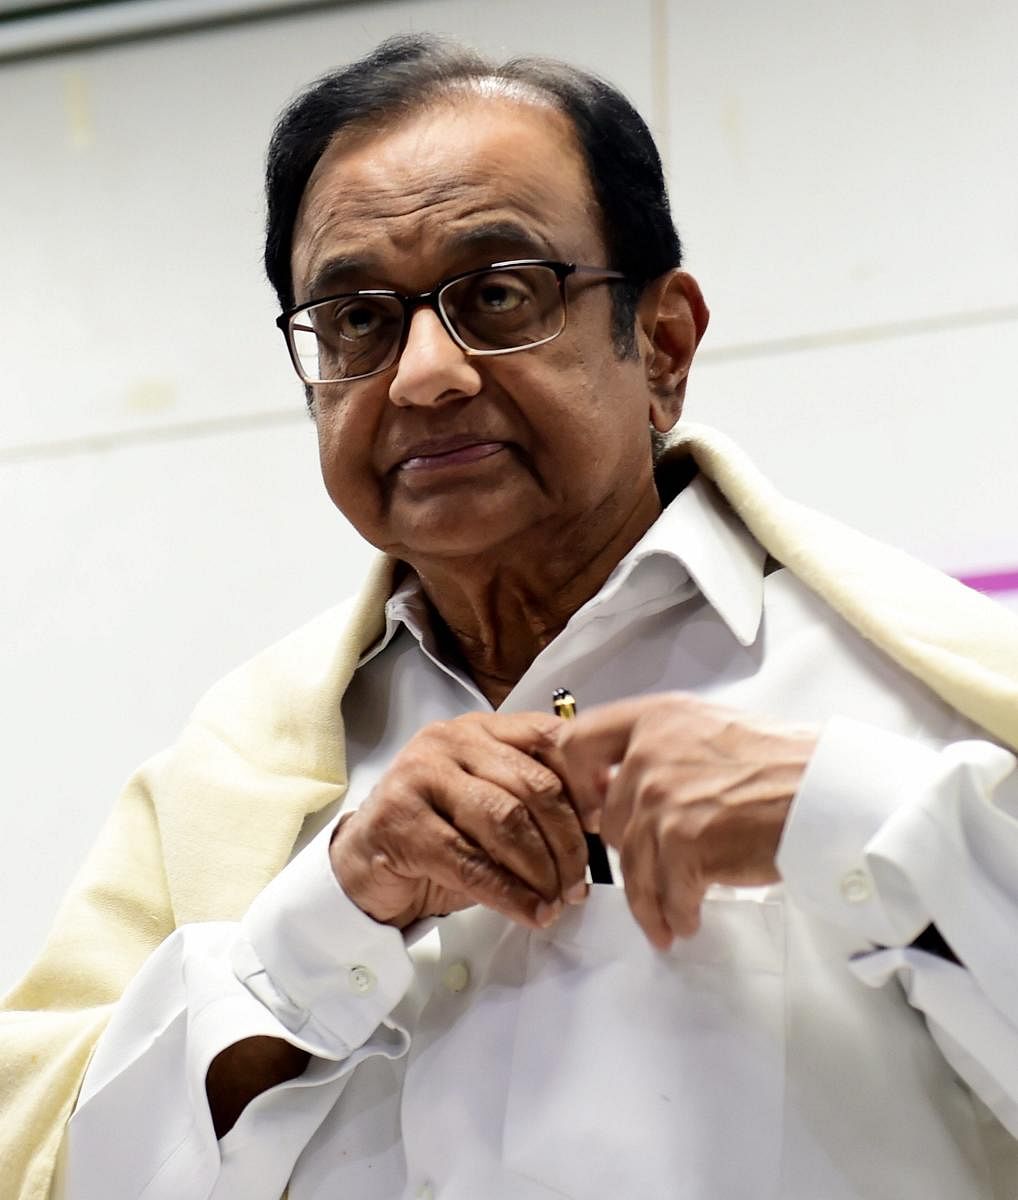 The 73-year-old will be questioned in the case which was filed by the agency in 2017, alleging irregularities in the FIPB clearance granted to a media group for receiving overseas funds of Rs 305 crore in 2007 when he was the finance minister.(PTI Photo)